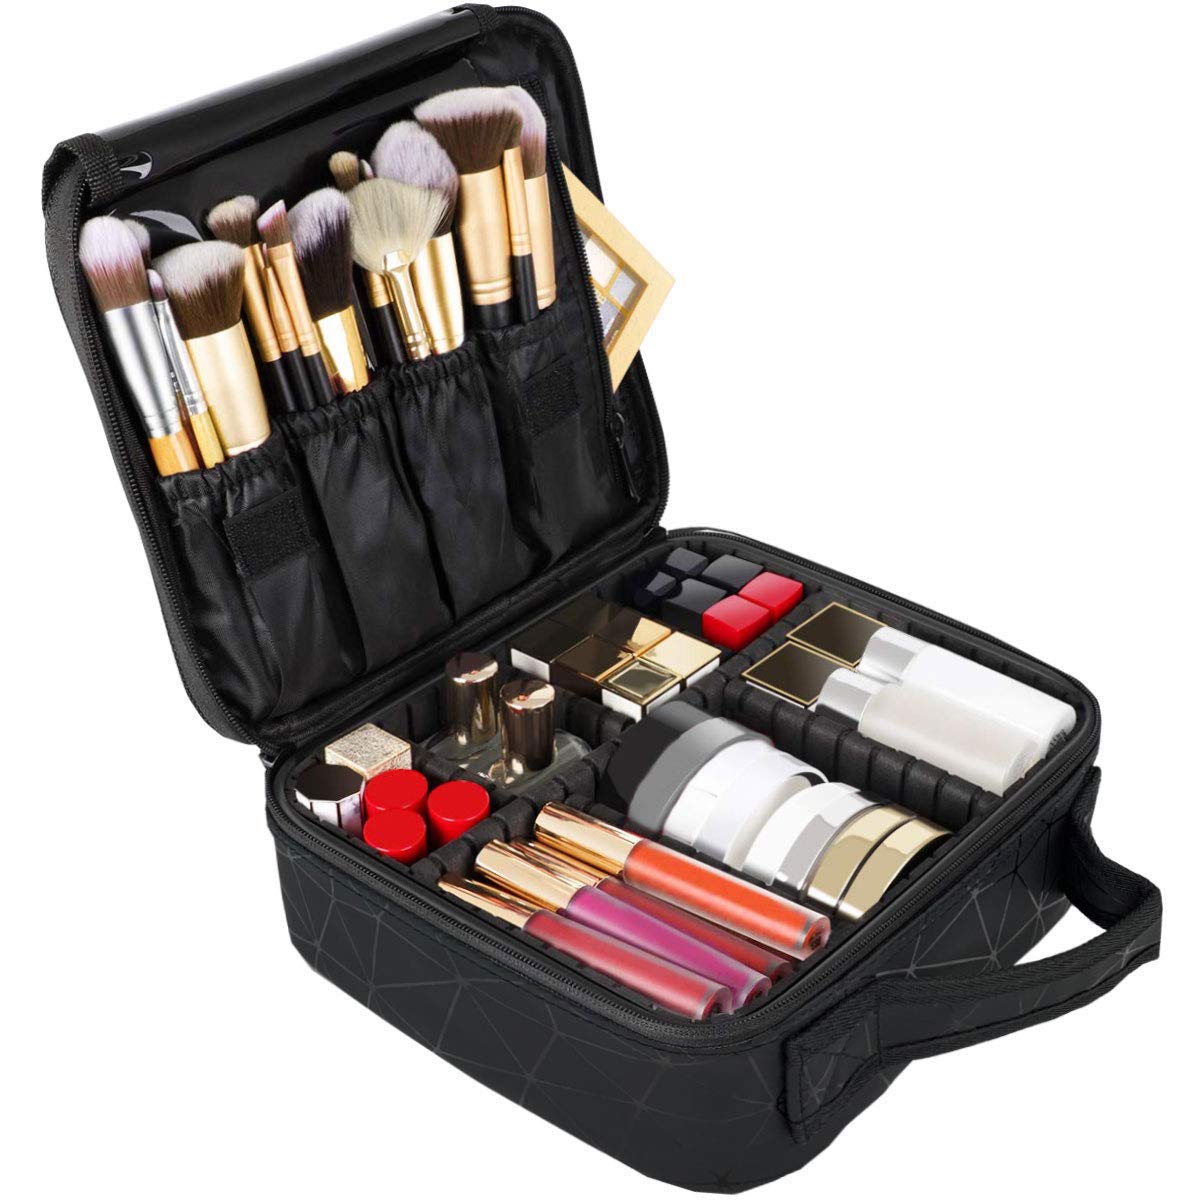 Makeup Cosmetic Storage Case with Adjustable Compartment (Black Diamond)